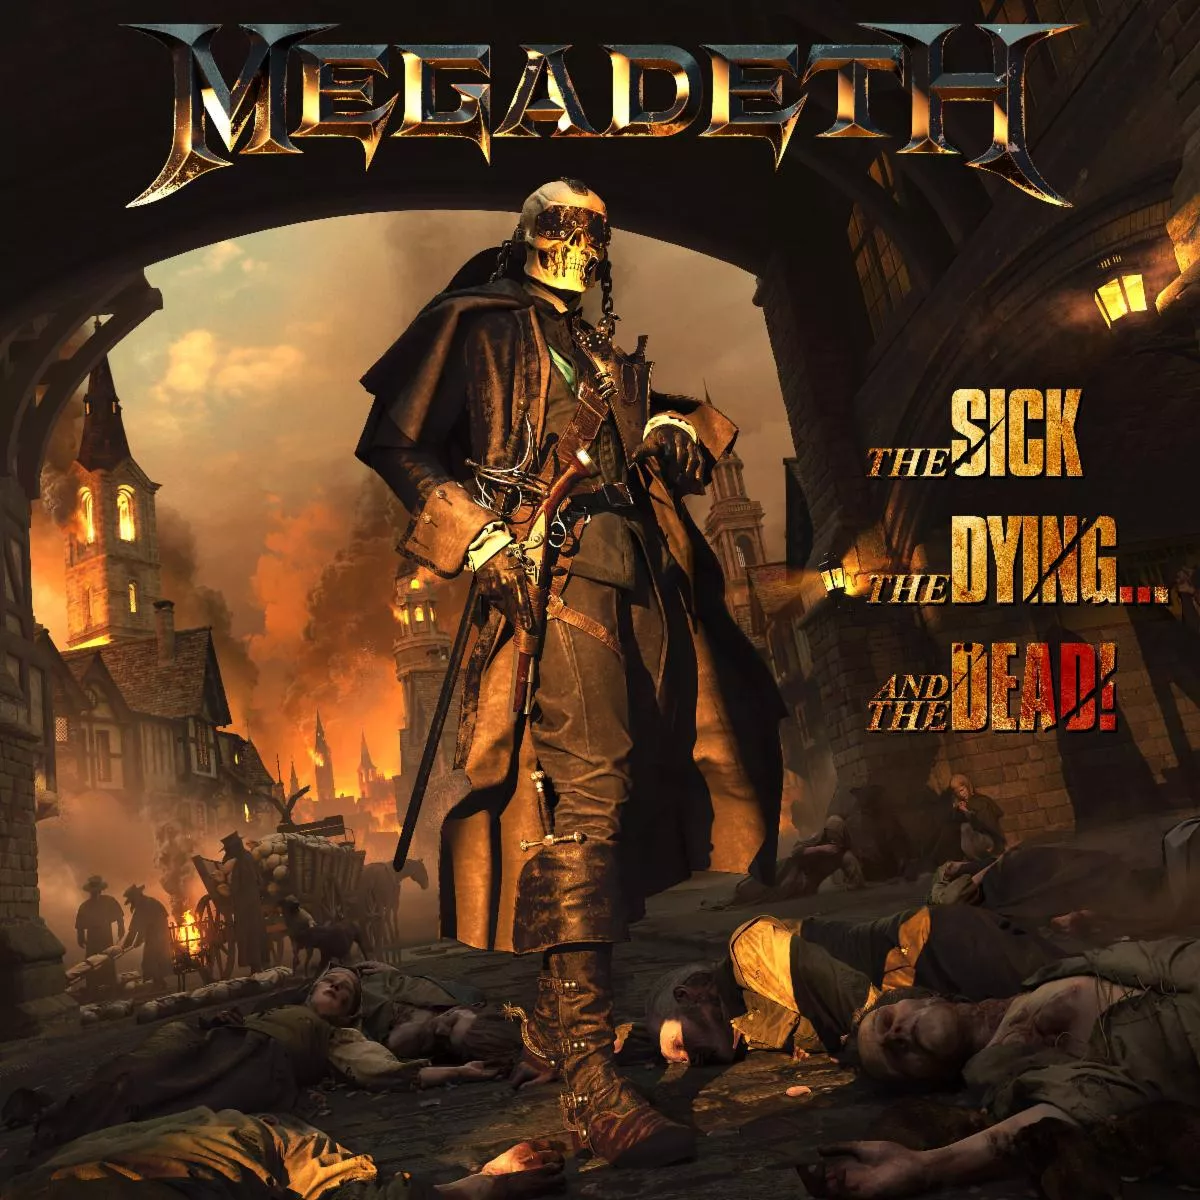 The Sick, the Dying... and the Dead - Megadeth